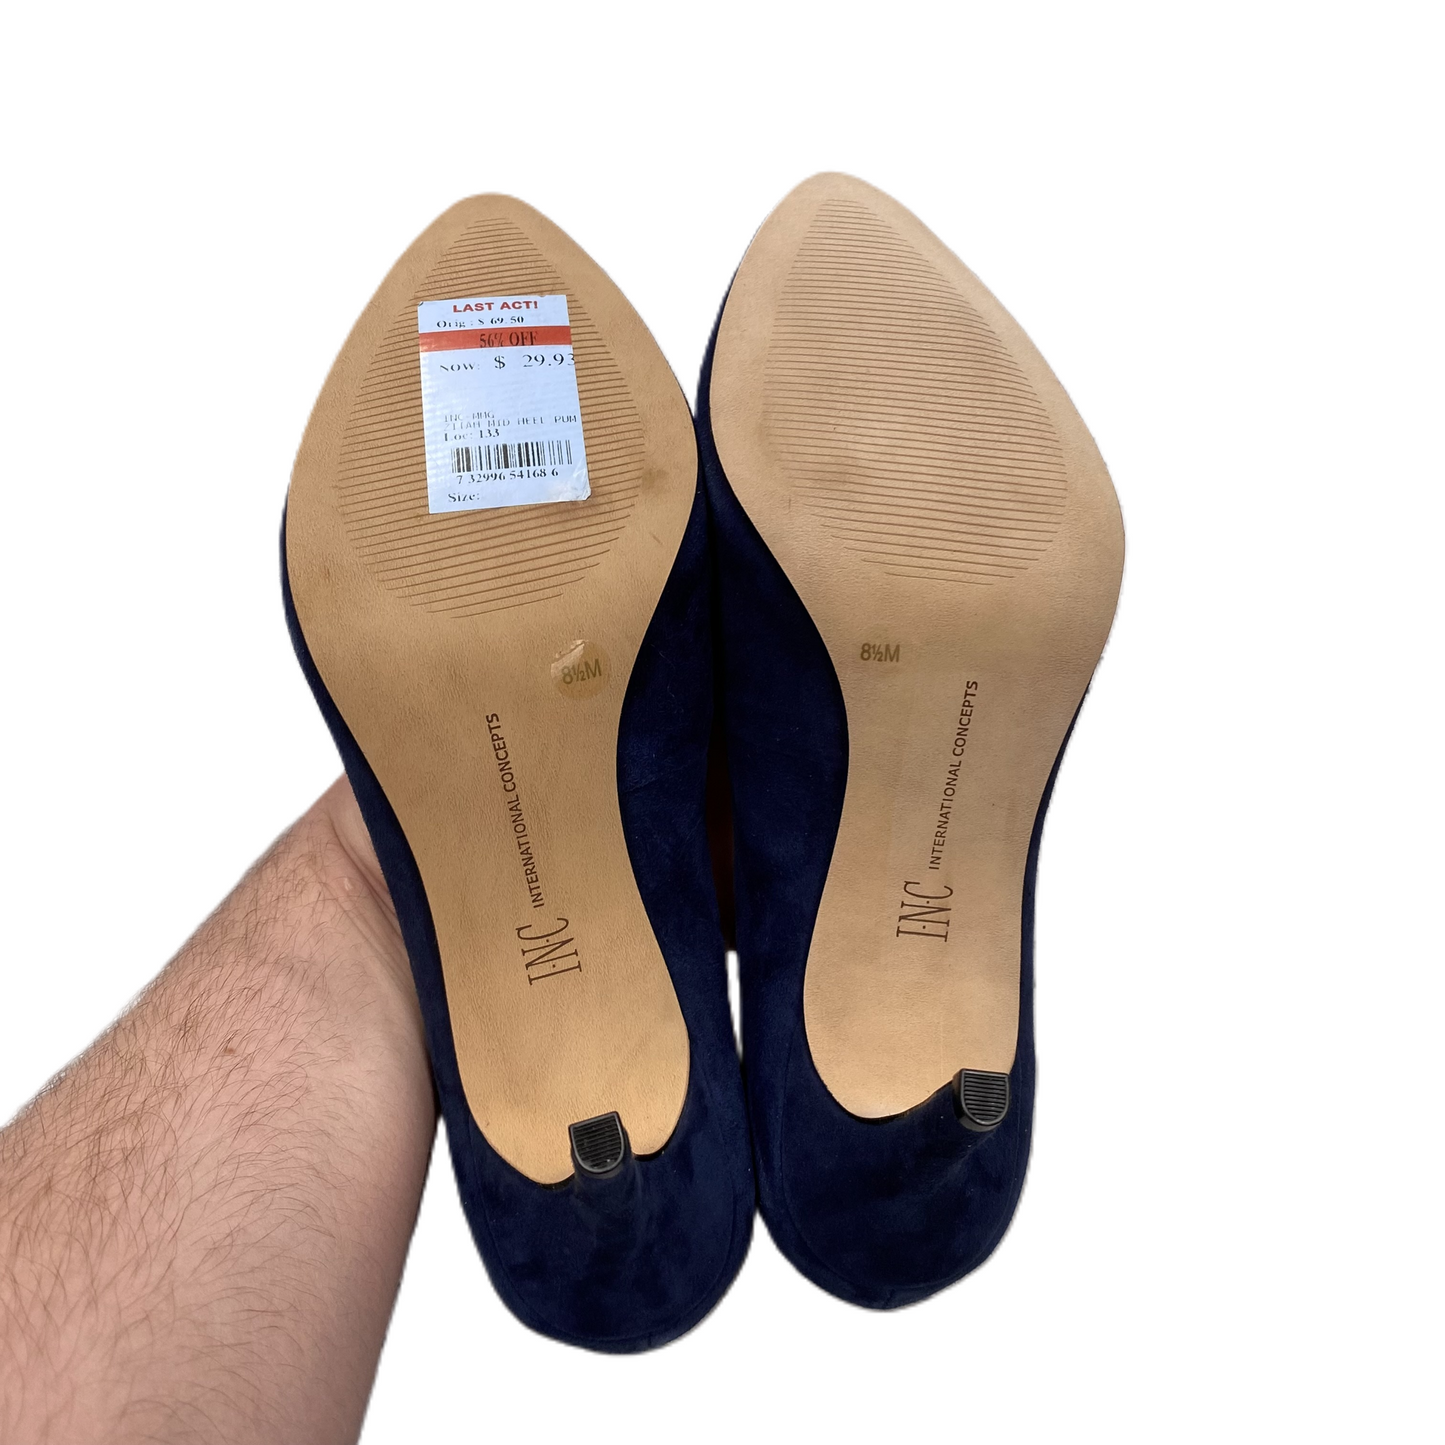 Navy Shoes Heels Stiletto By Inc, Size: 8.5